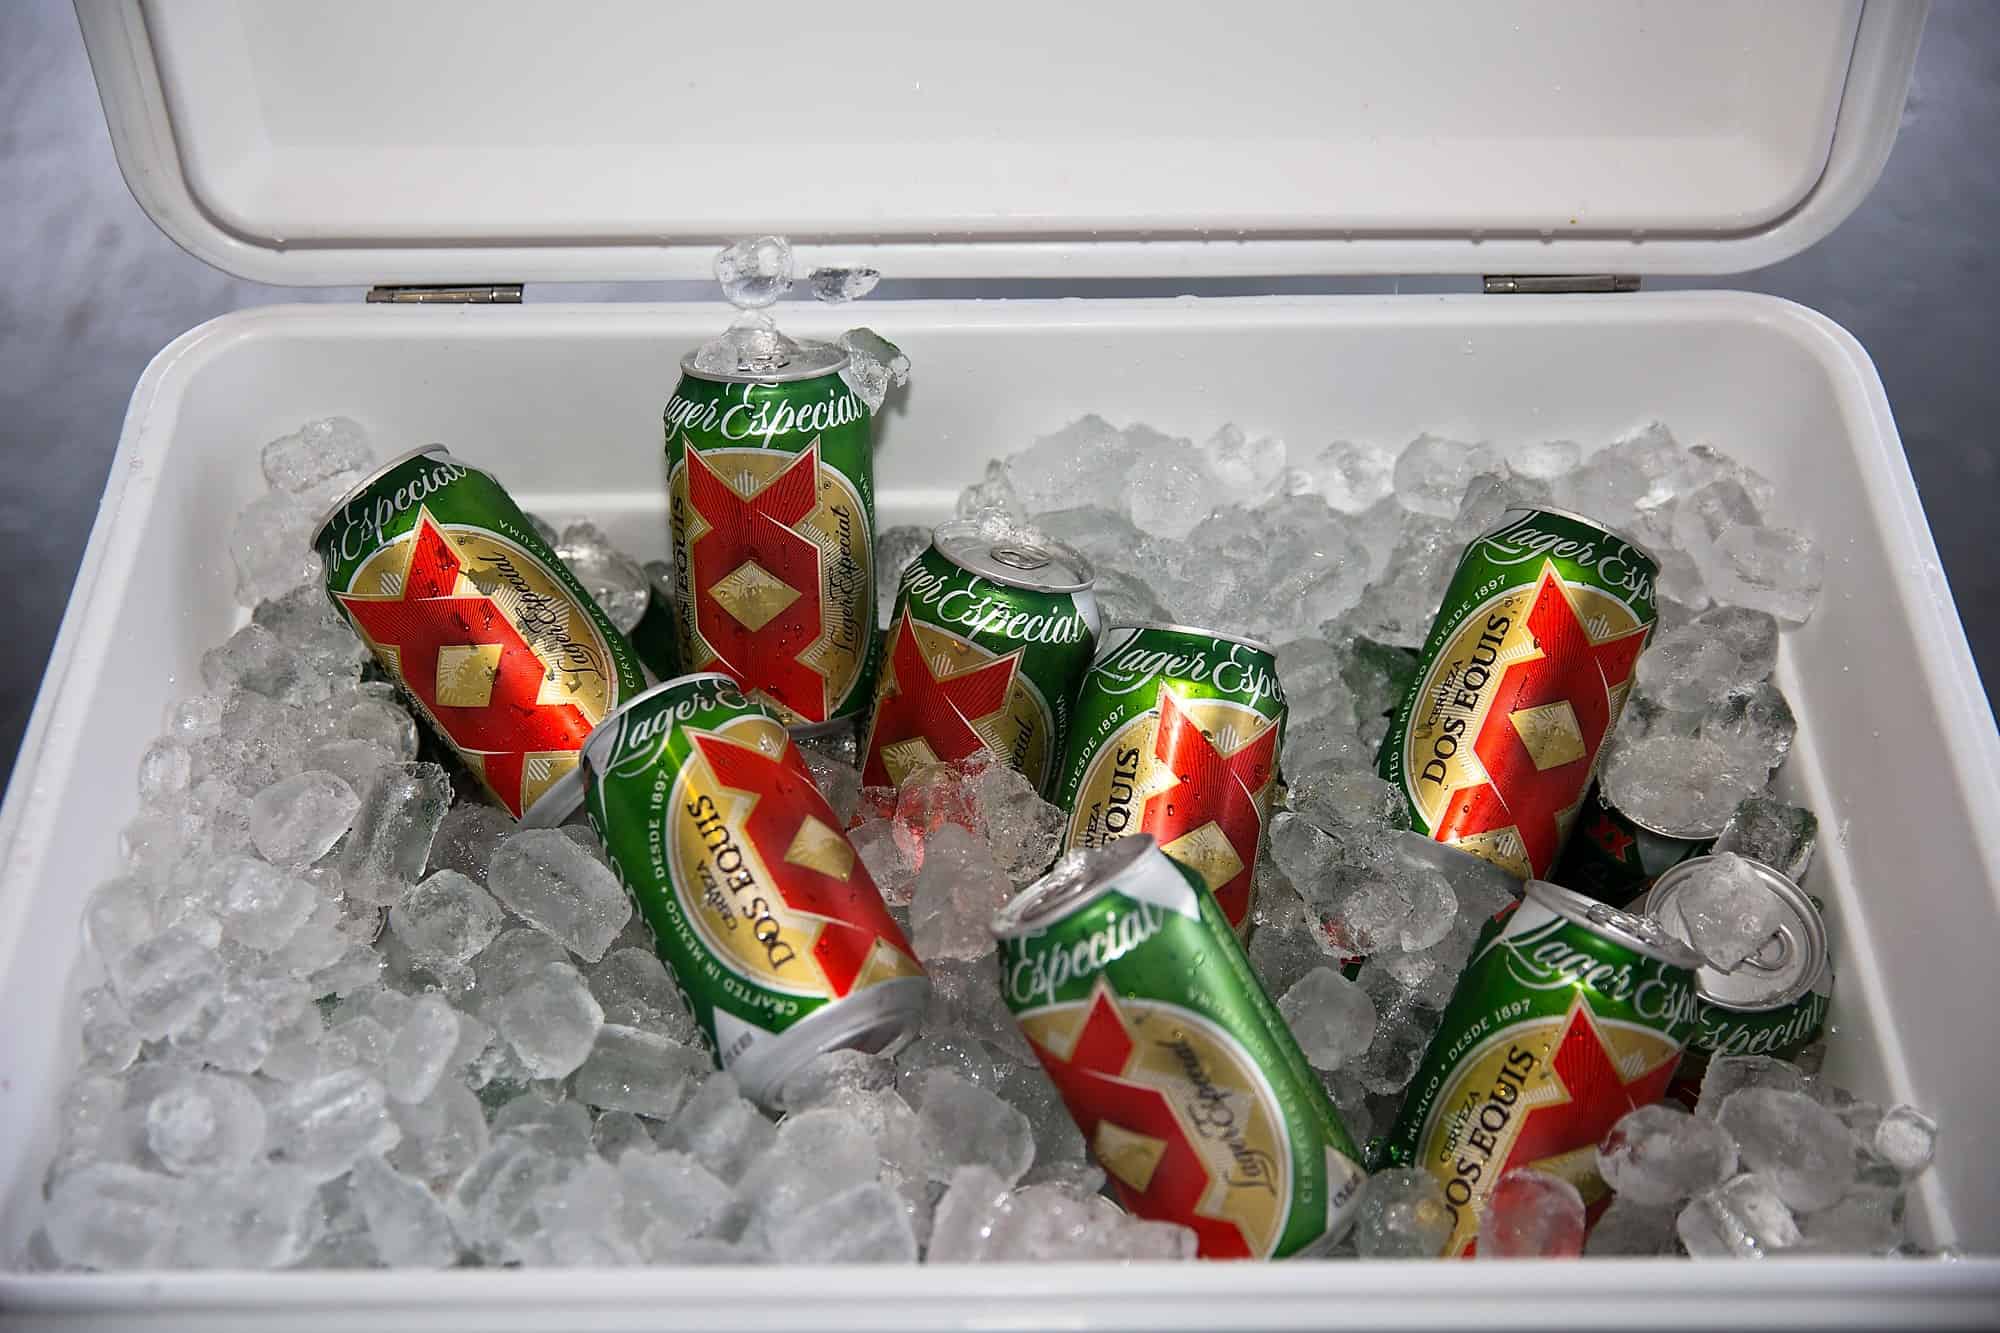 Dos Equis beer in ice chest